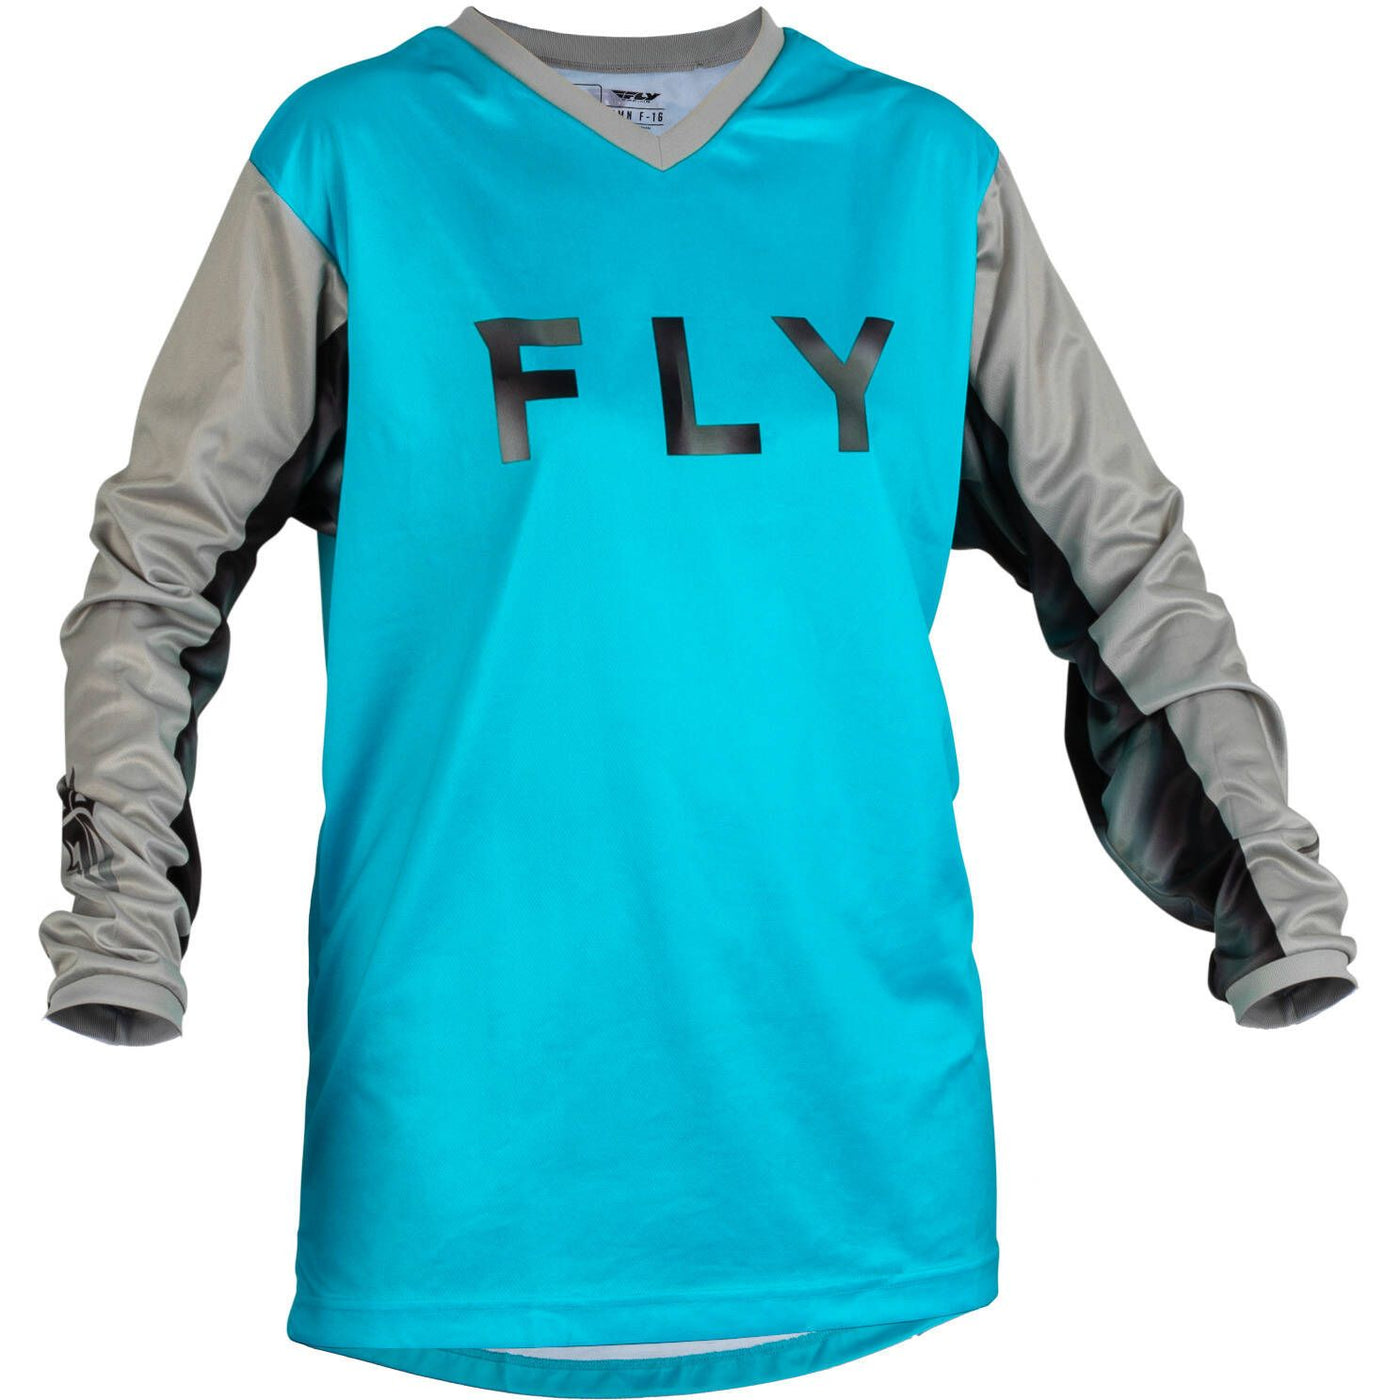 FLY WOMENS F-16 JERSEY